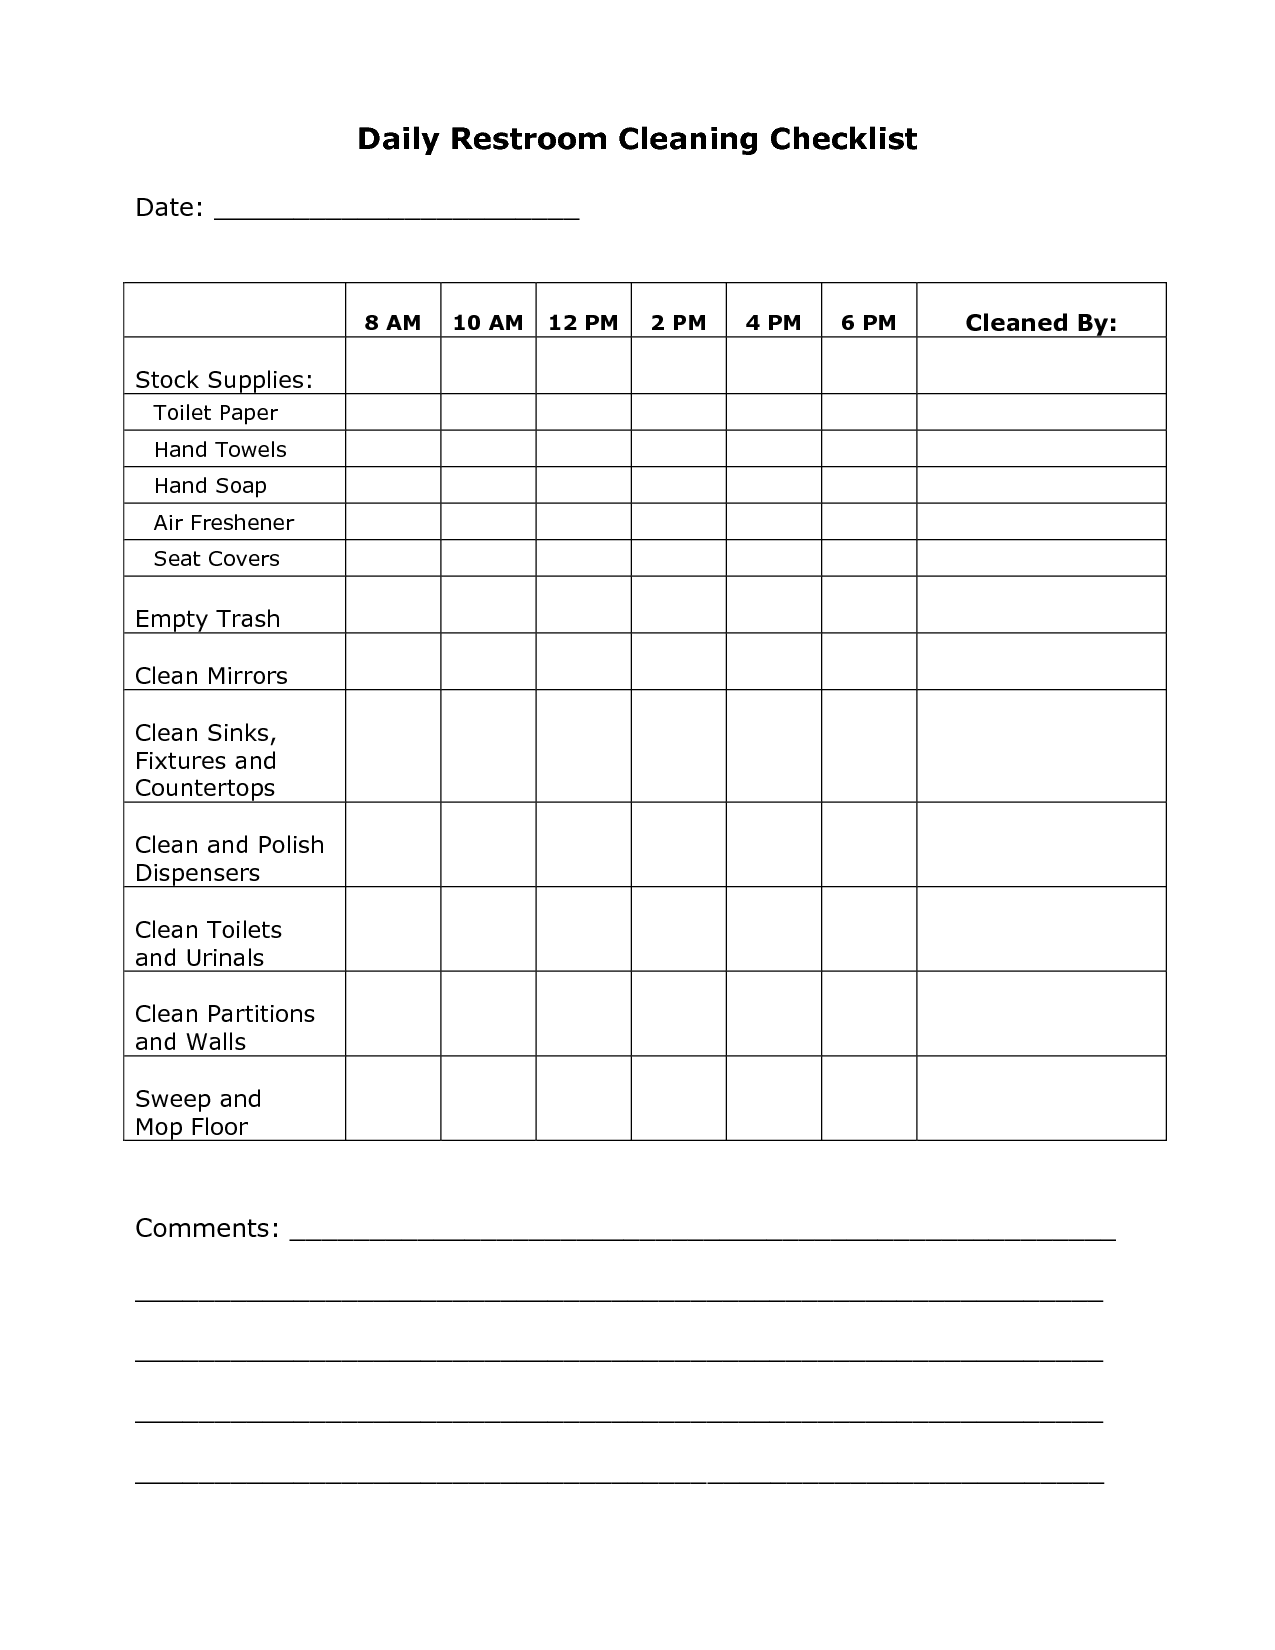 6-best-images-of-printable-cleaning-check-off-sheets-kitchen-cleaning-checklist-daily